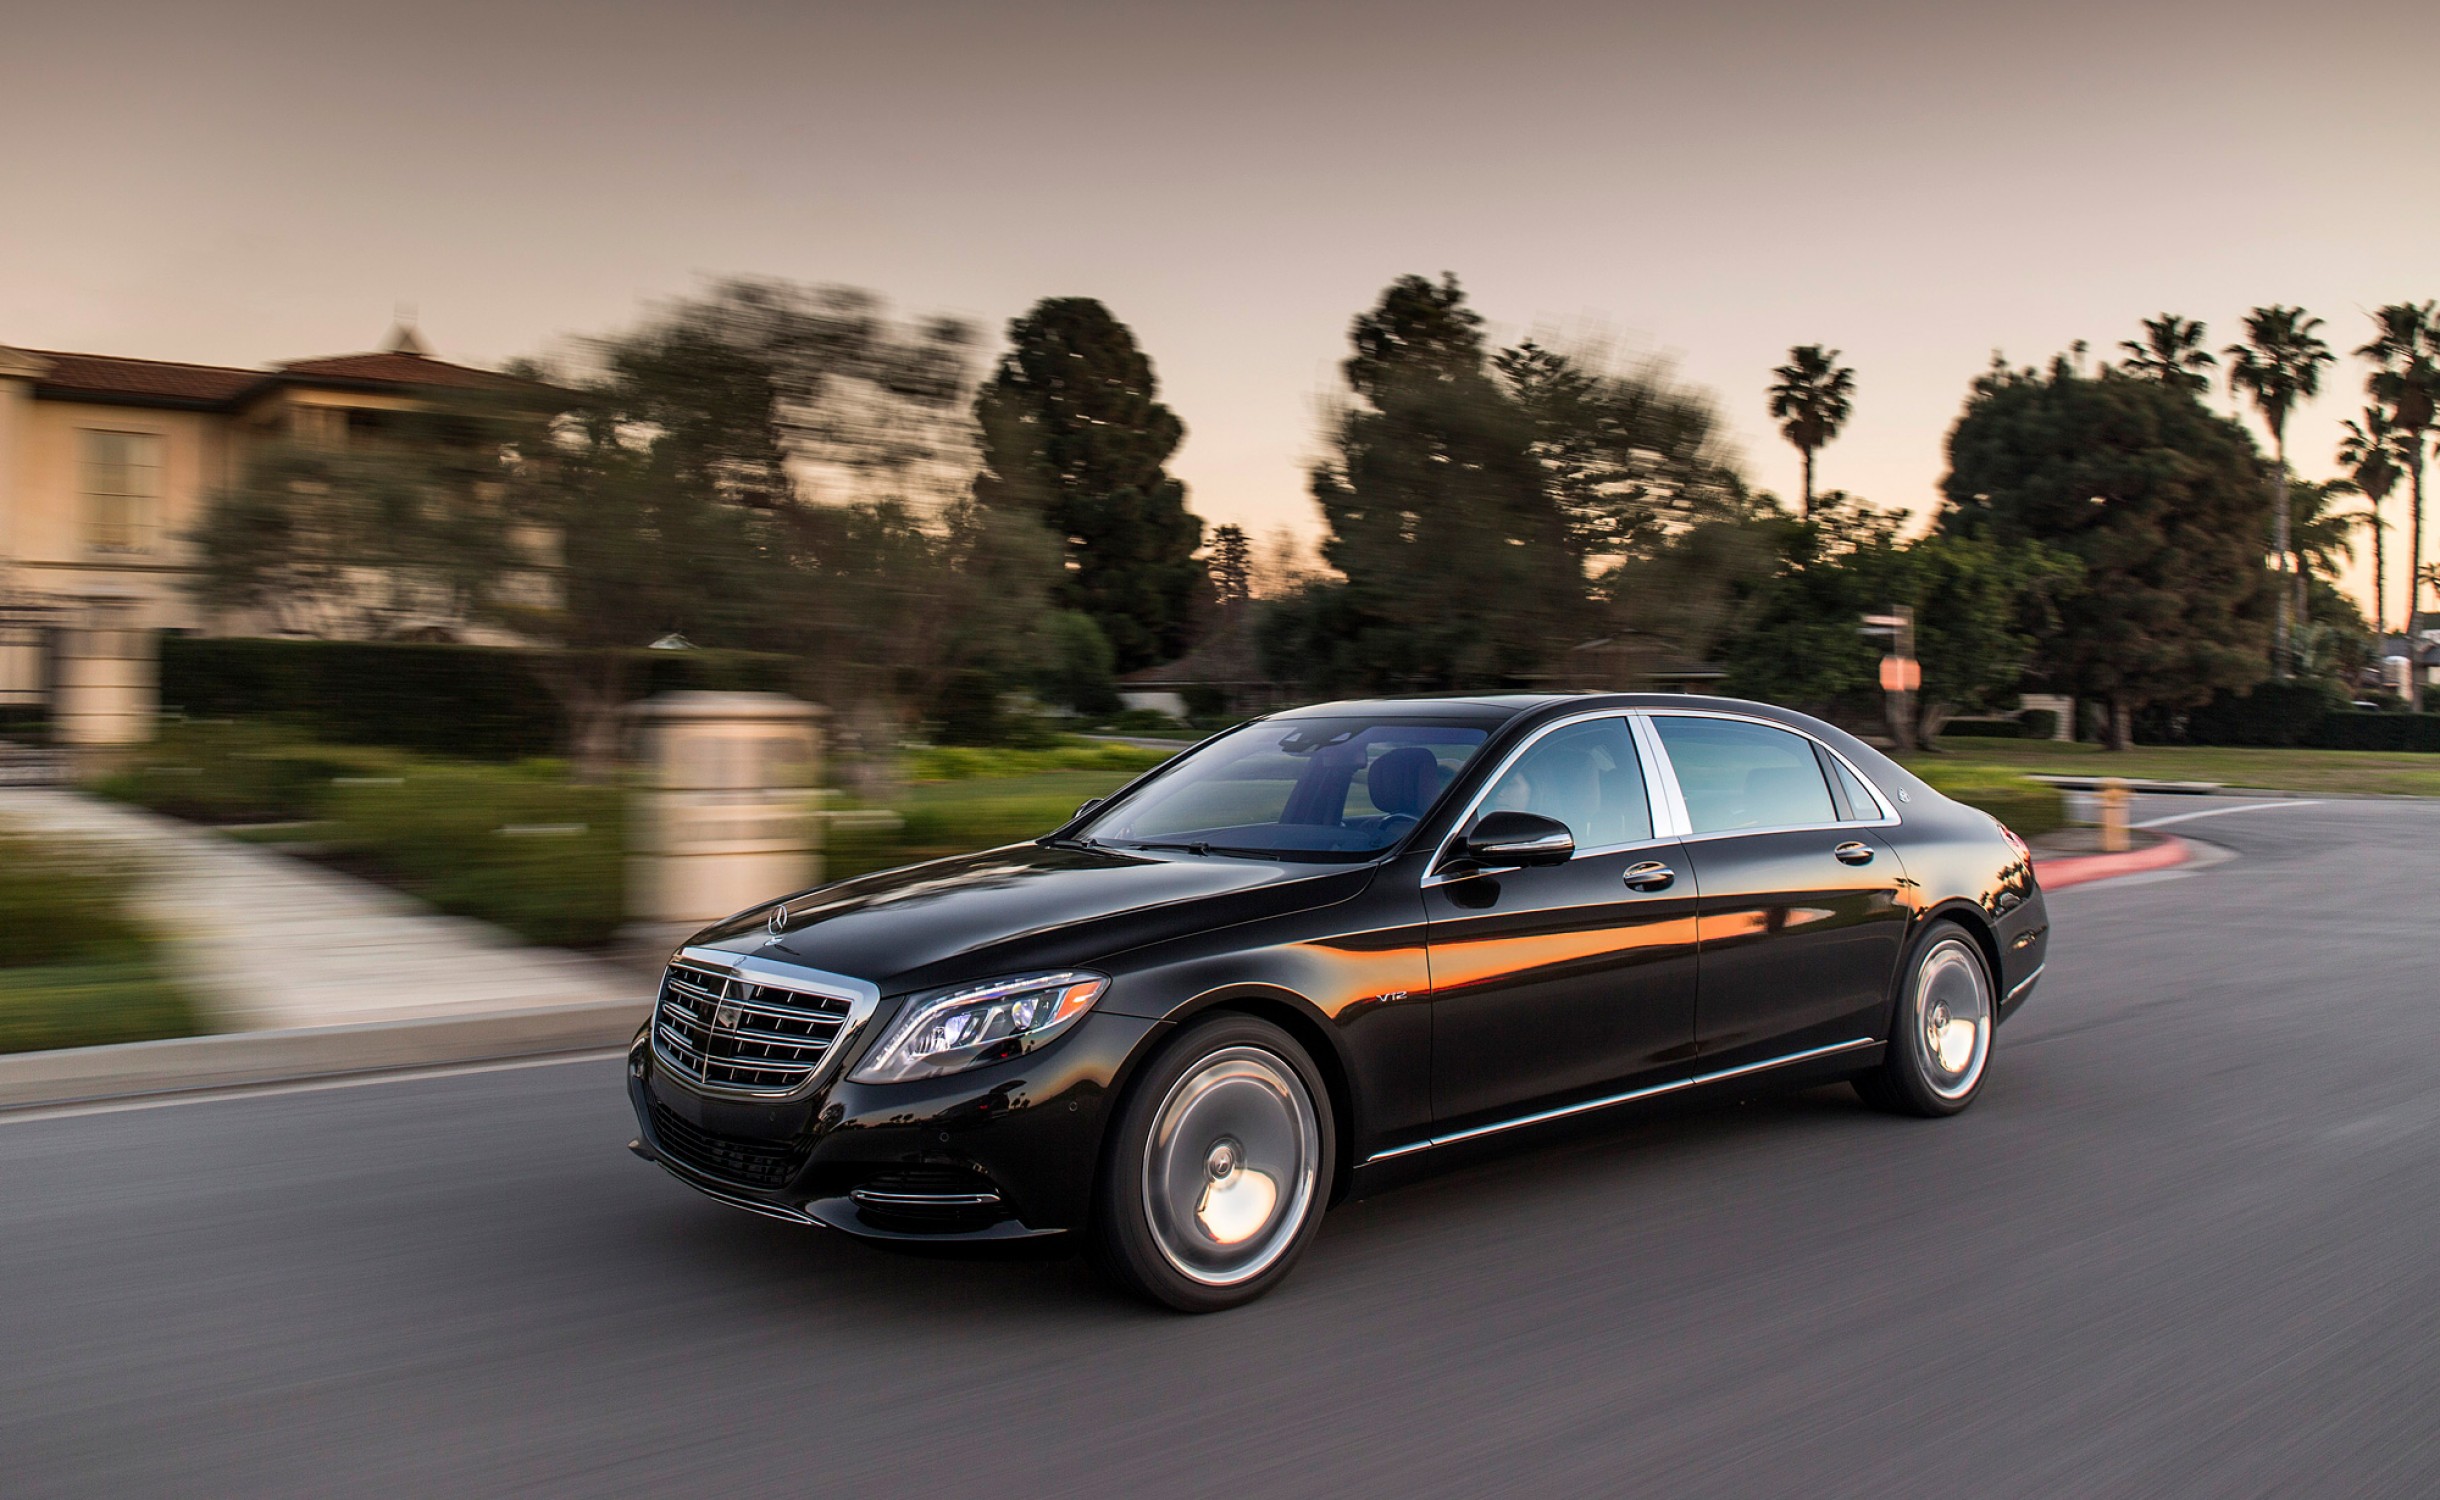 Luxury Limousine service with chauffeur on the French Riviera